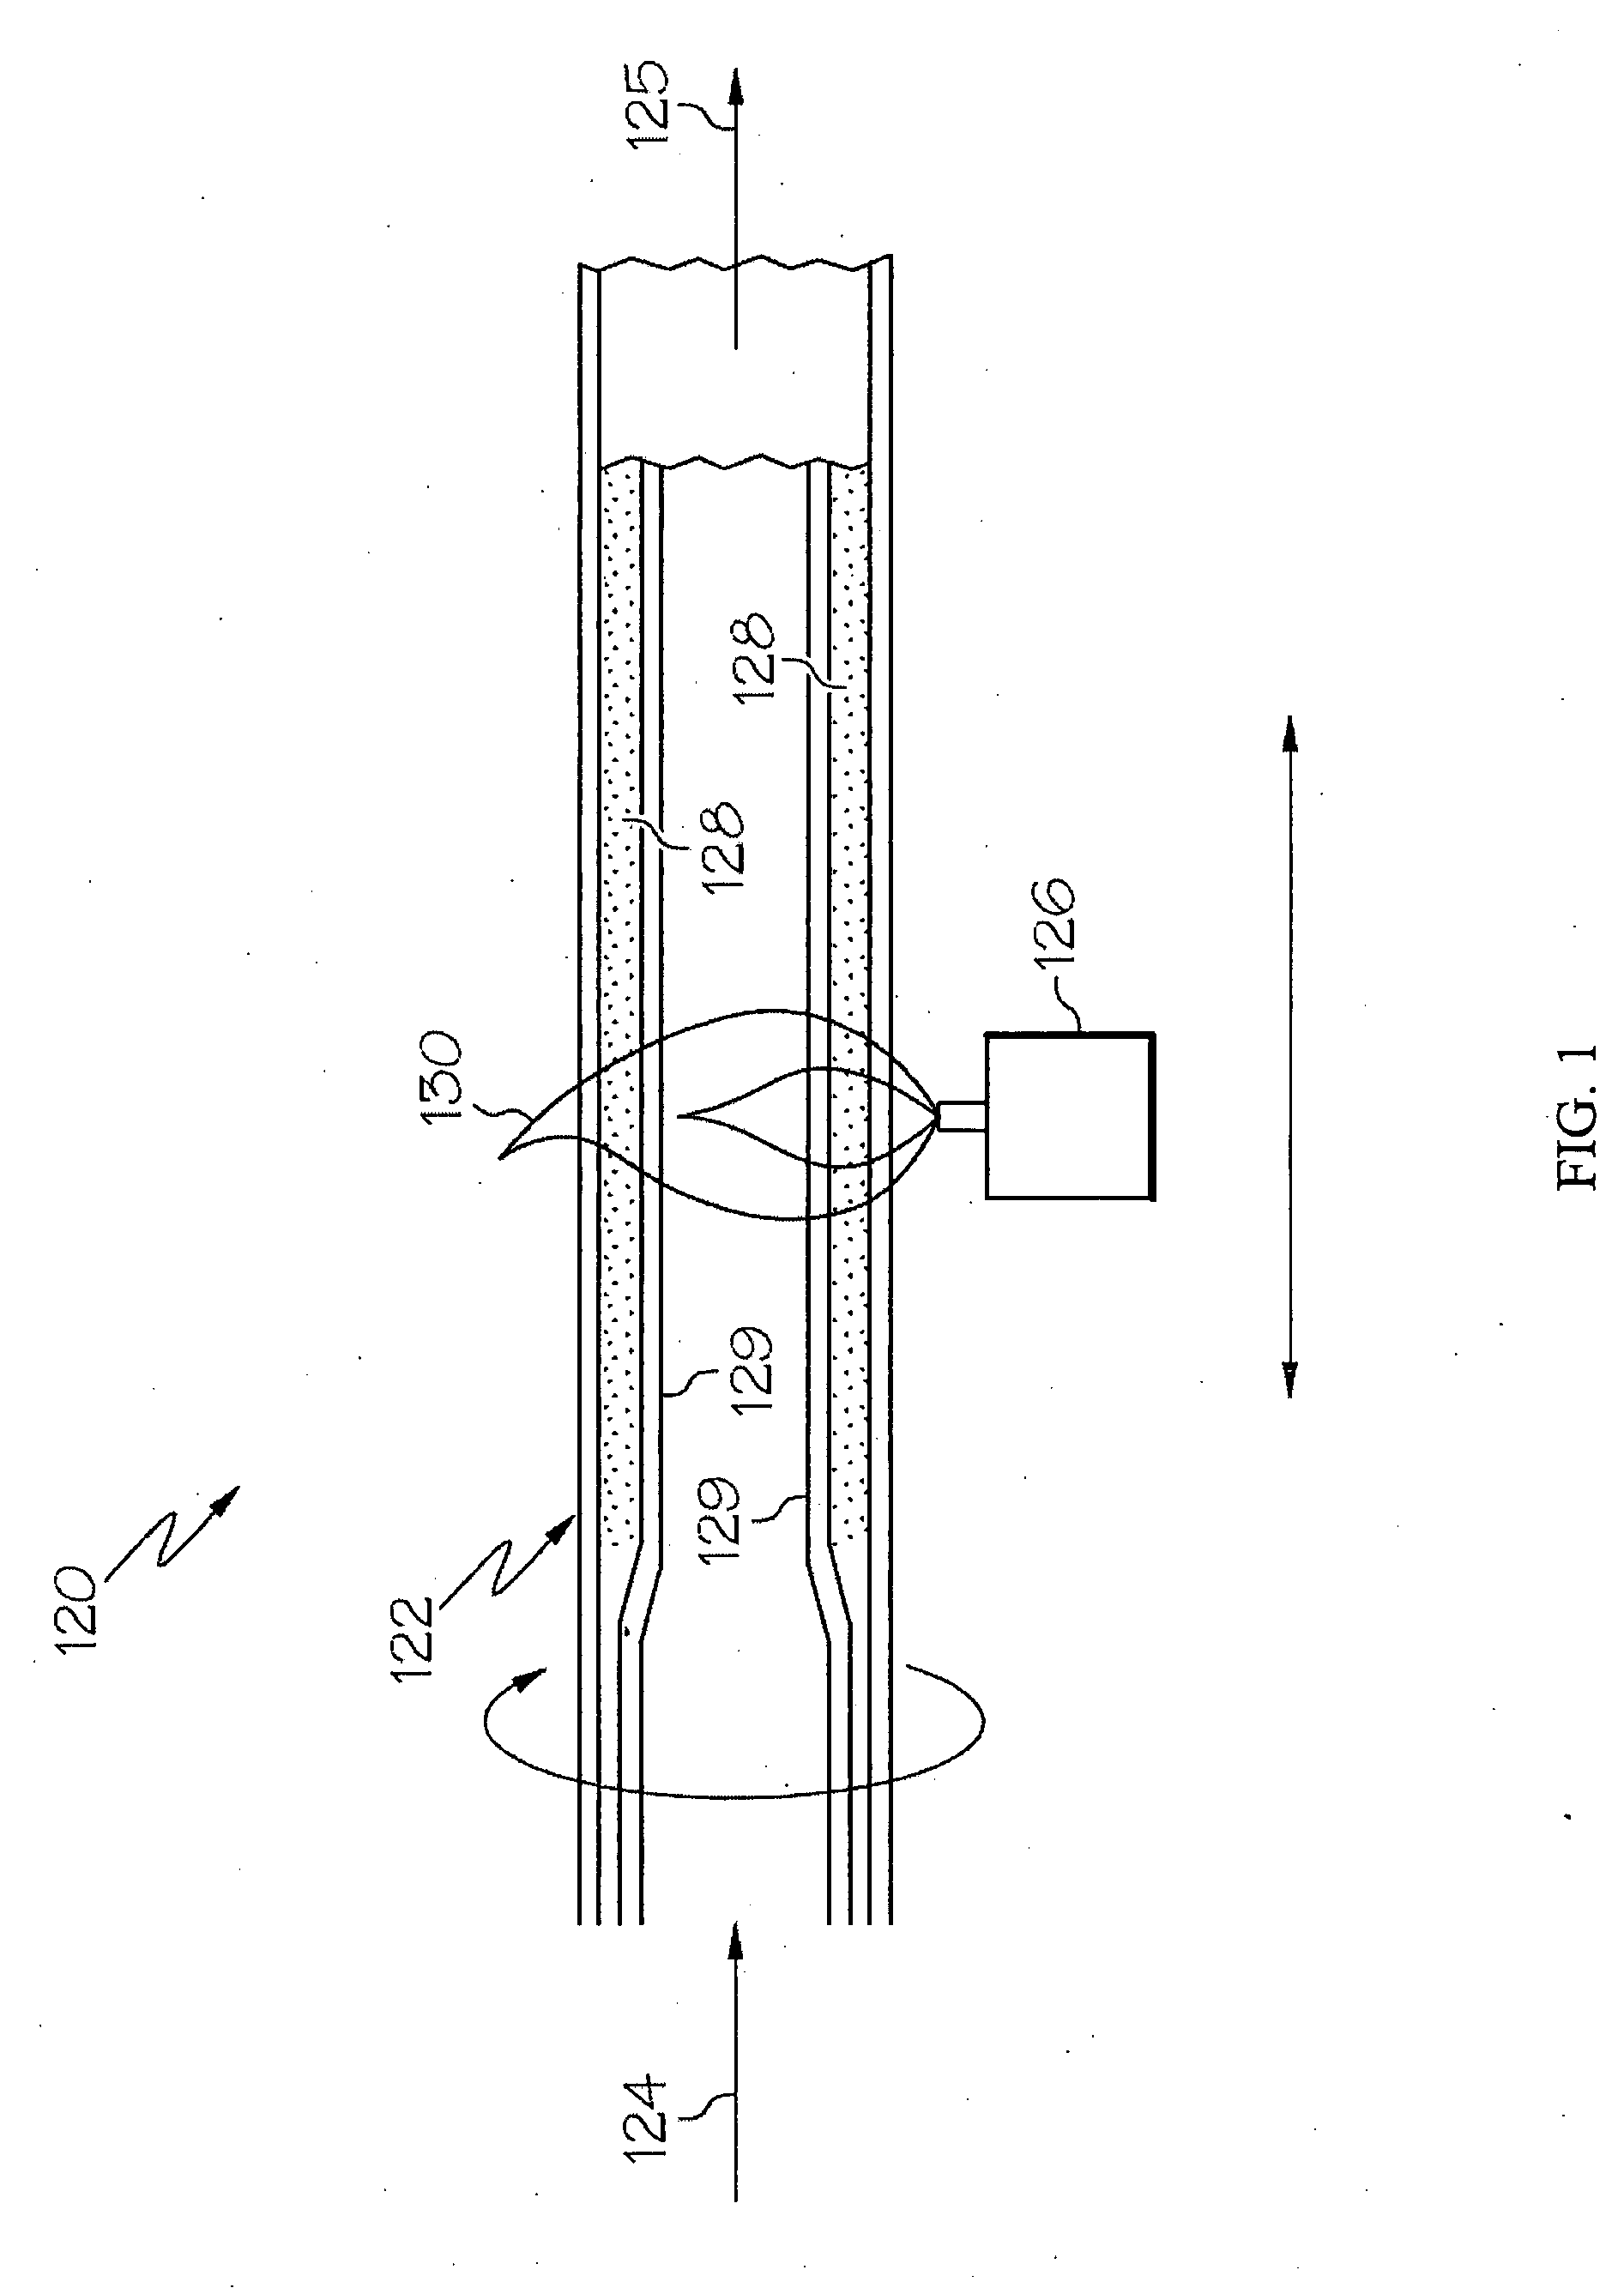 Methods for making optical fiber preforms and microstructured optical fibers